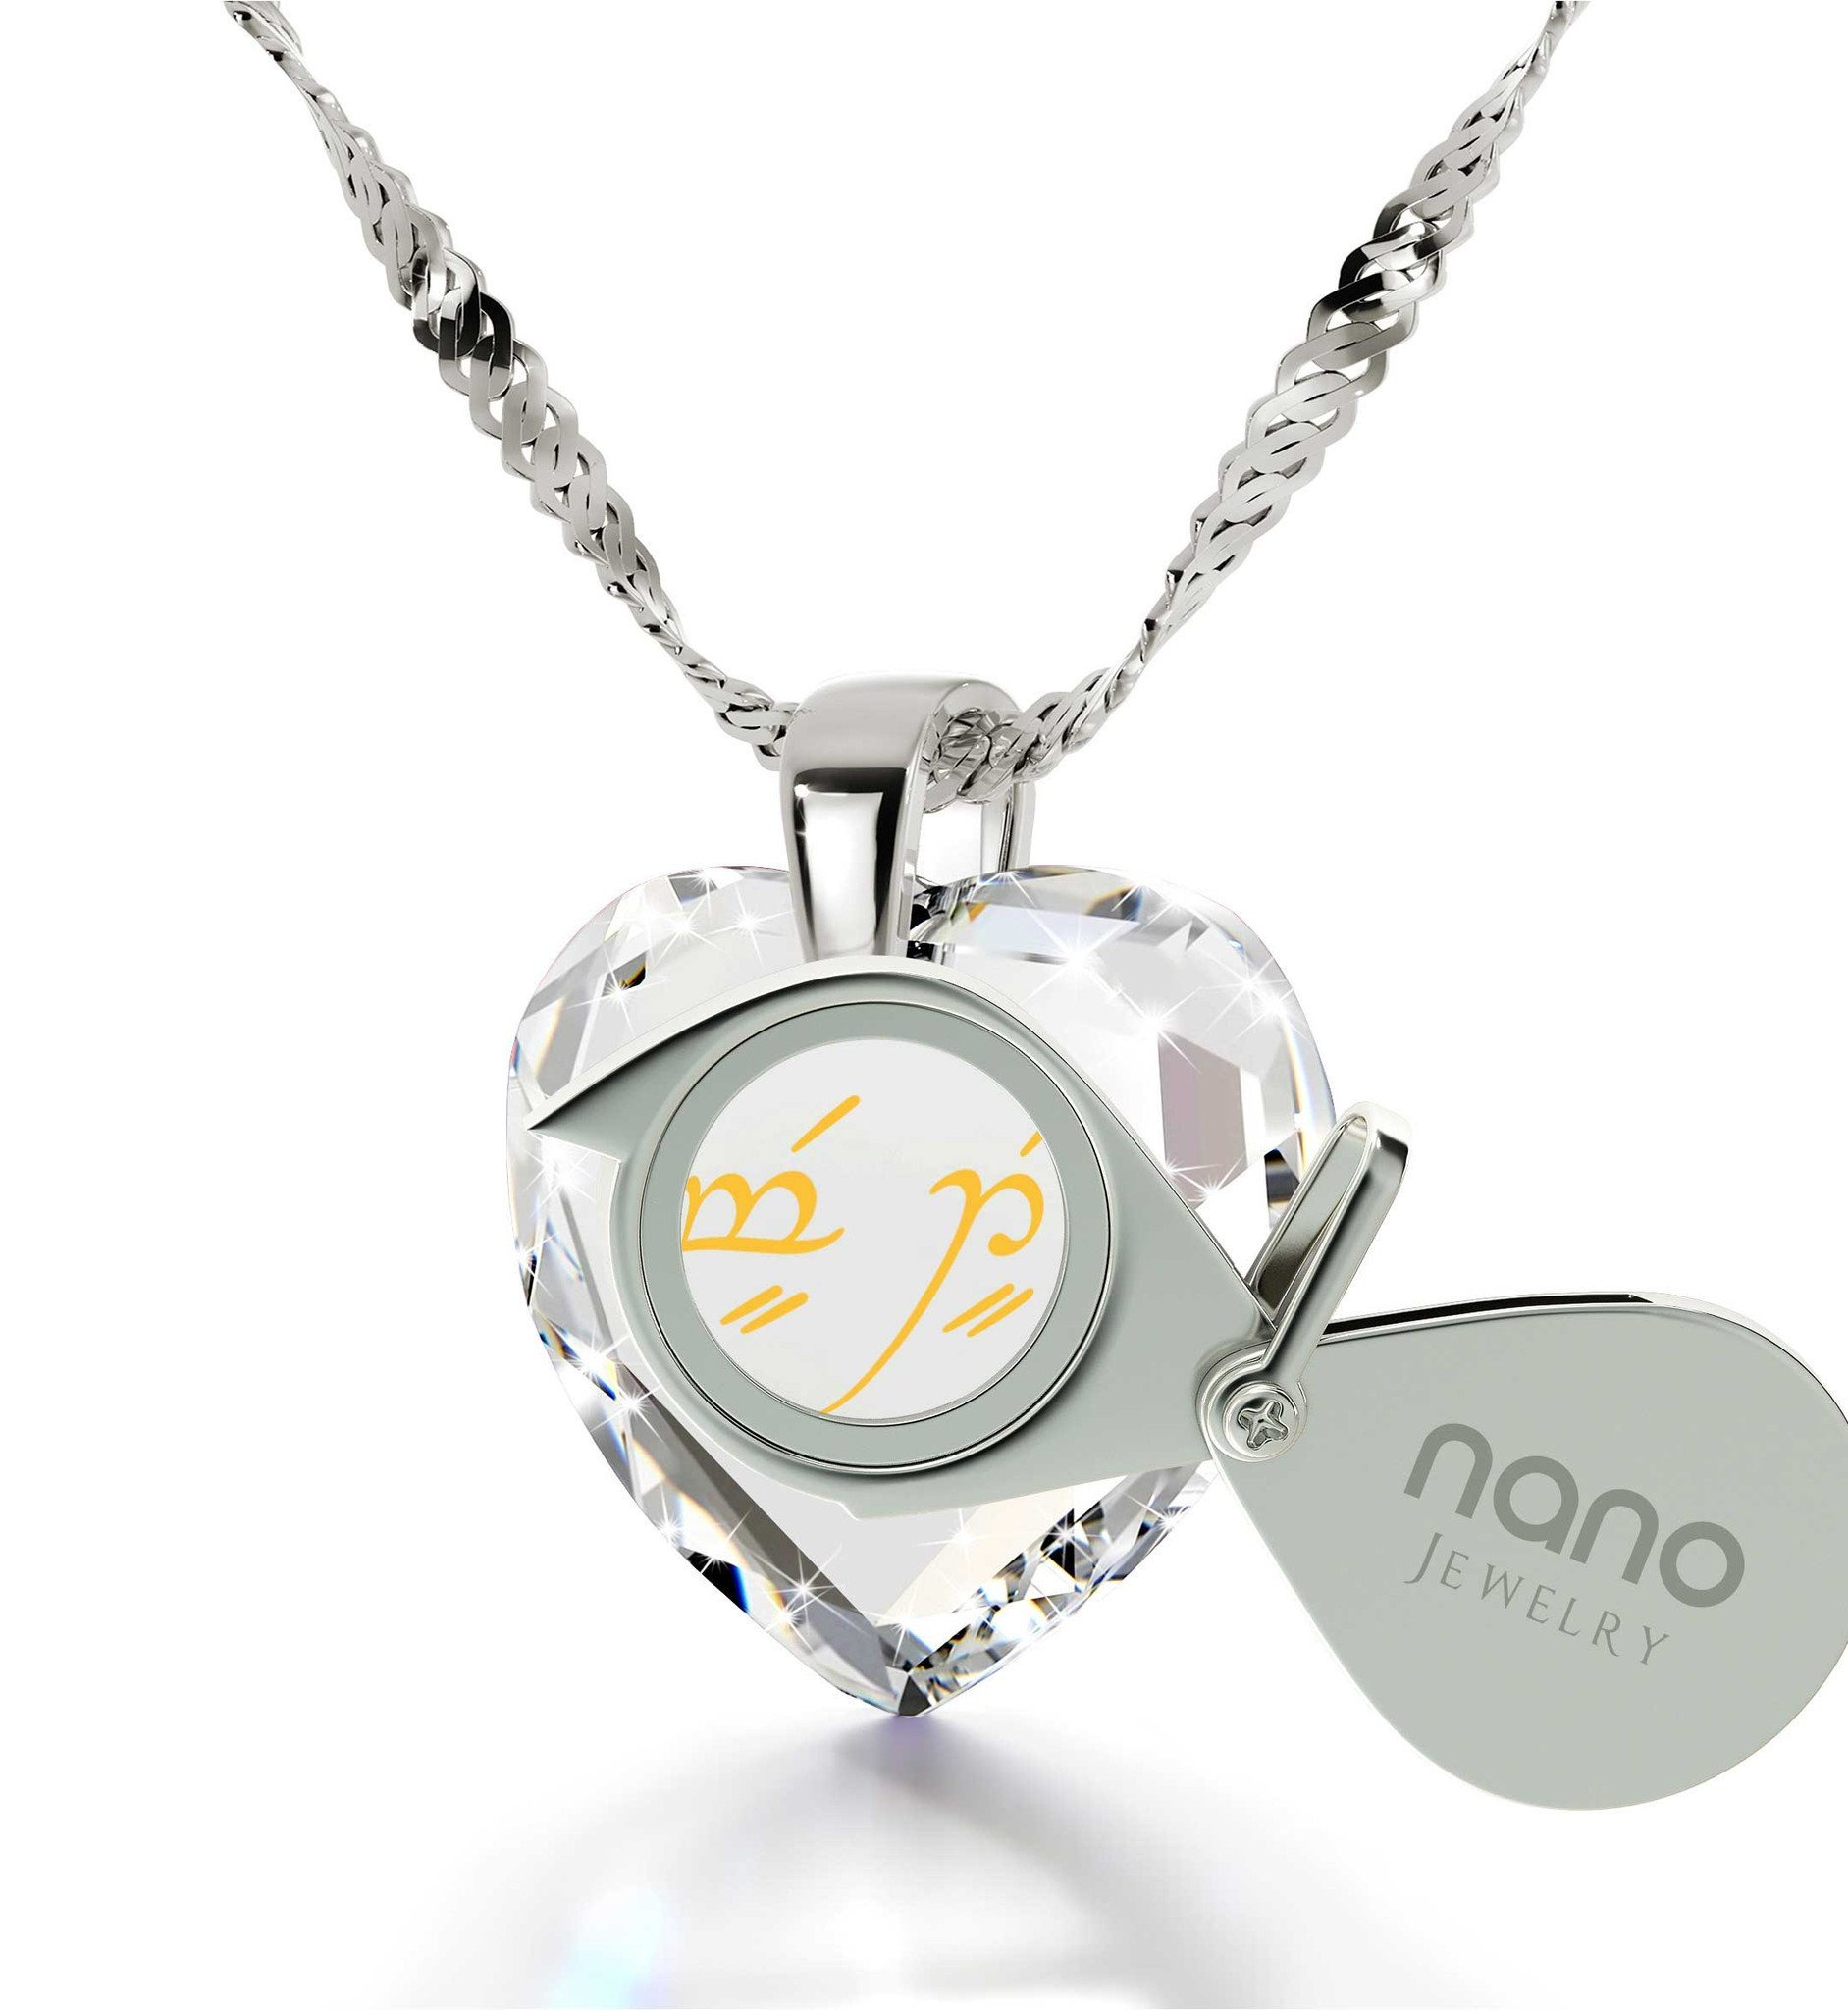 10 Nice Lord Of The Rings Gifts Ideas lord of the rings jewelry get a unique romantic gift at nano jewelry 2024